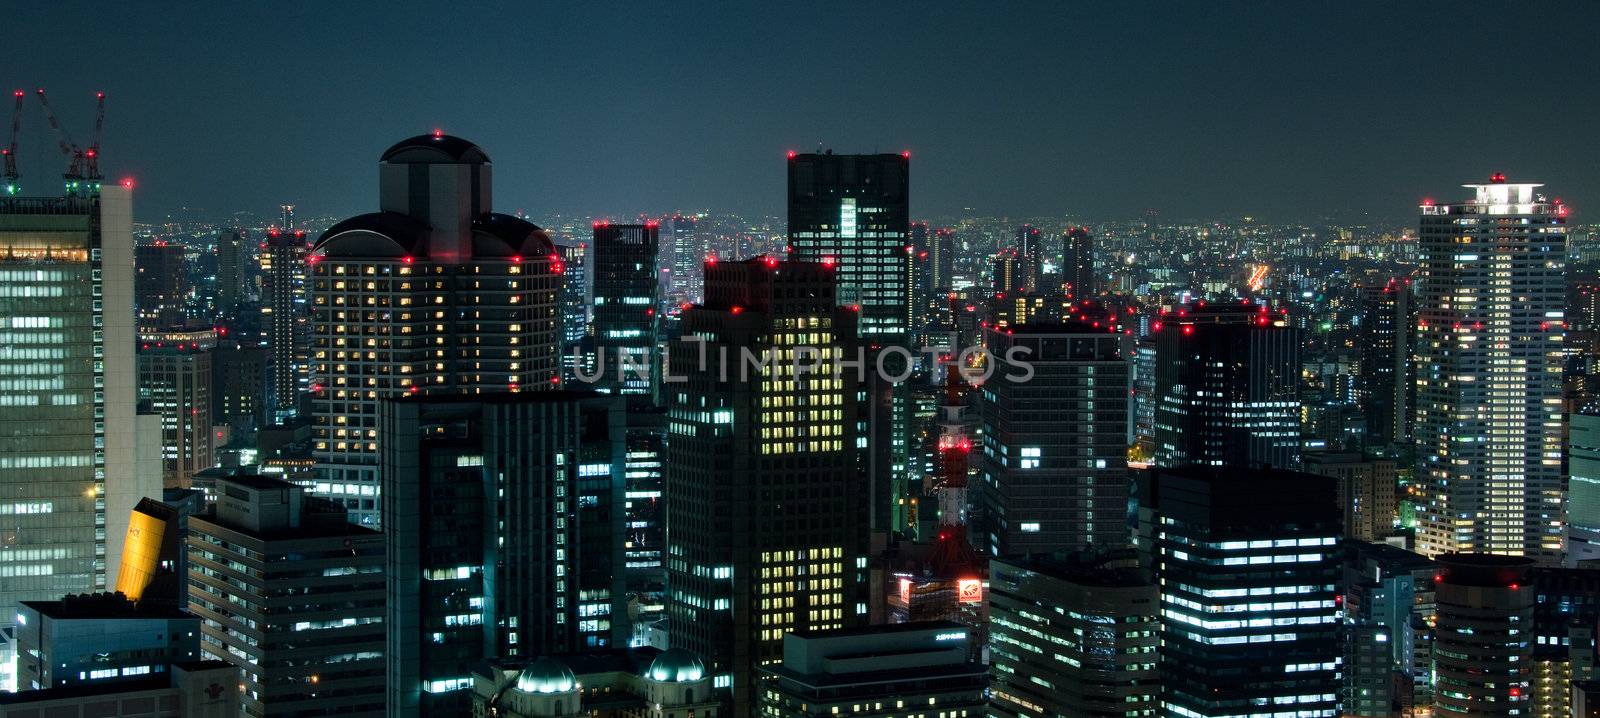 Skyline of Osaka City in Japan at night with lots of lights